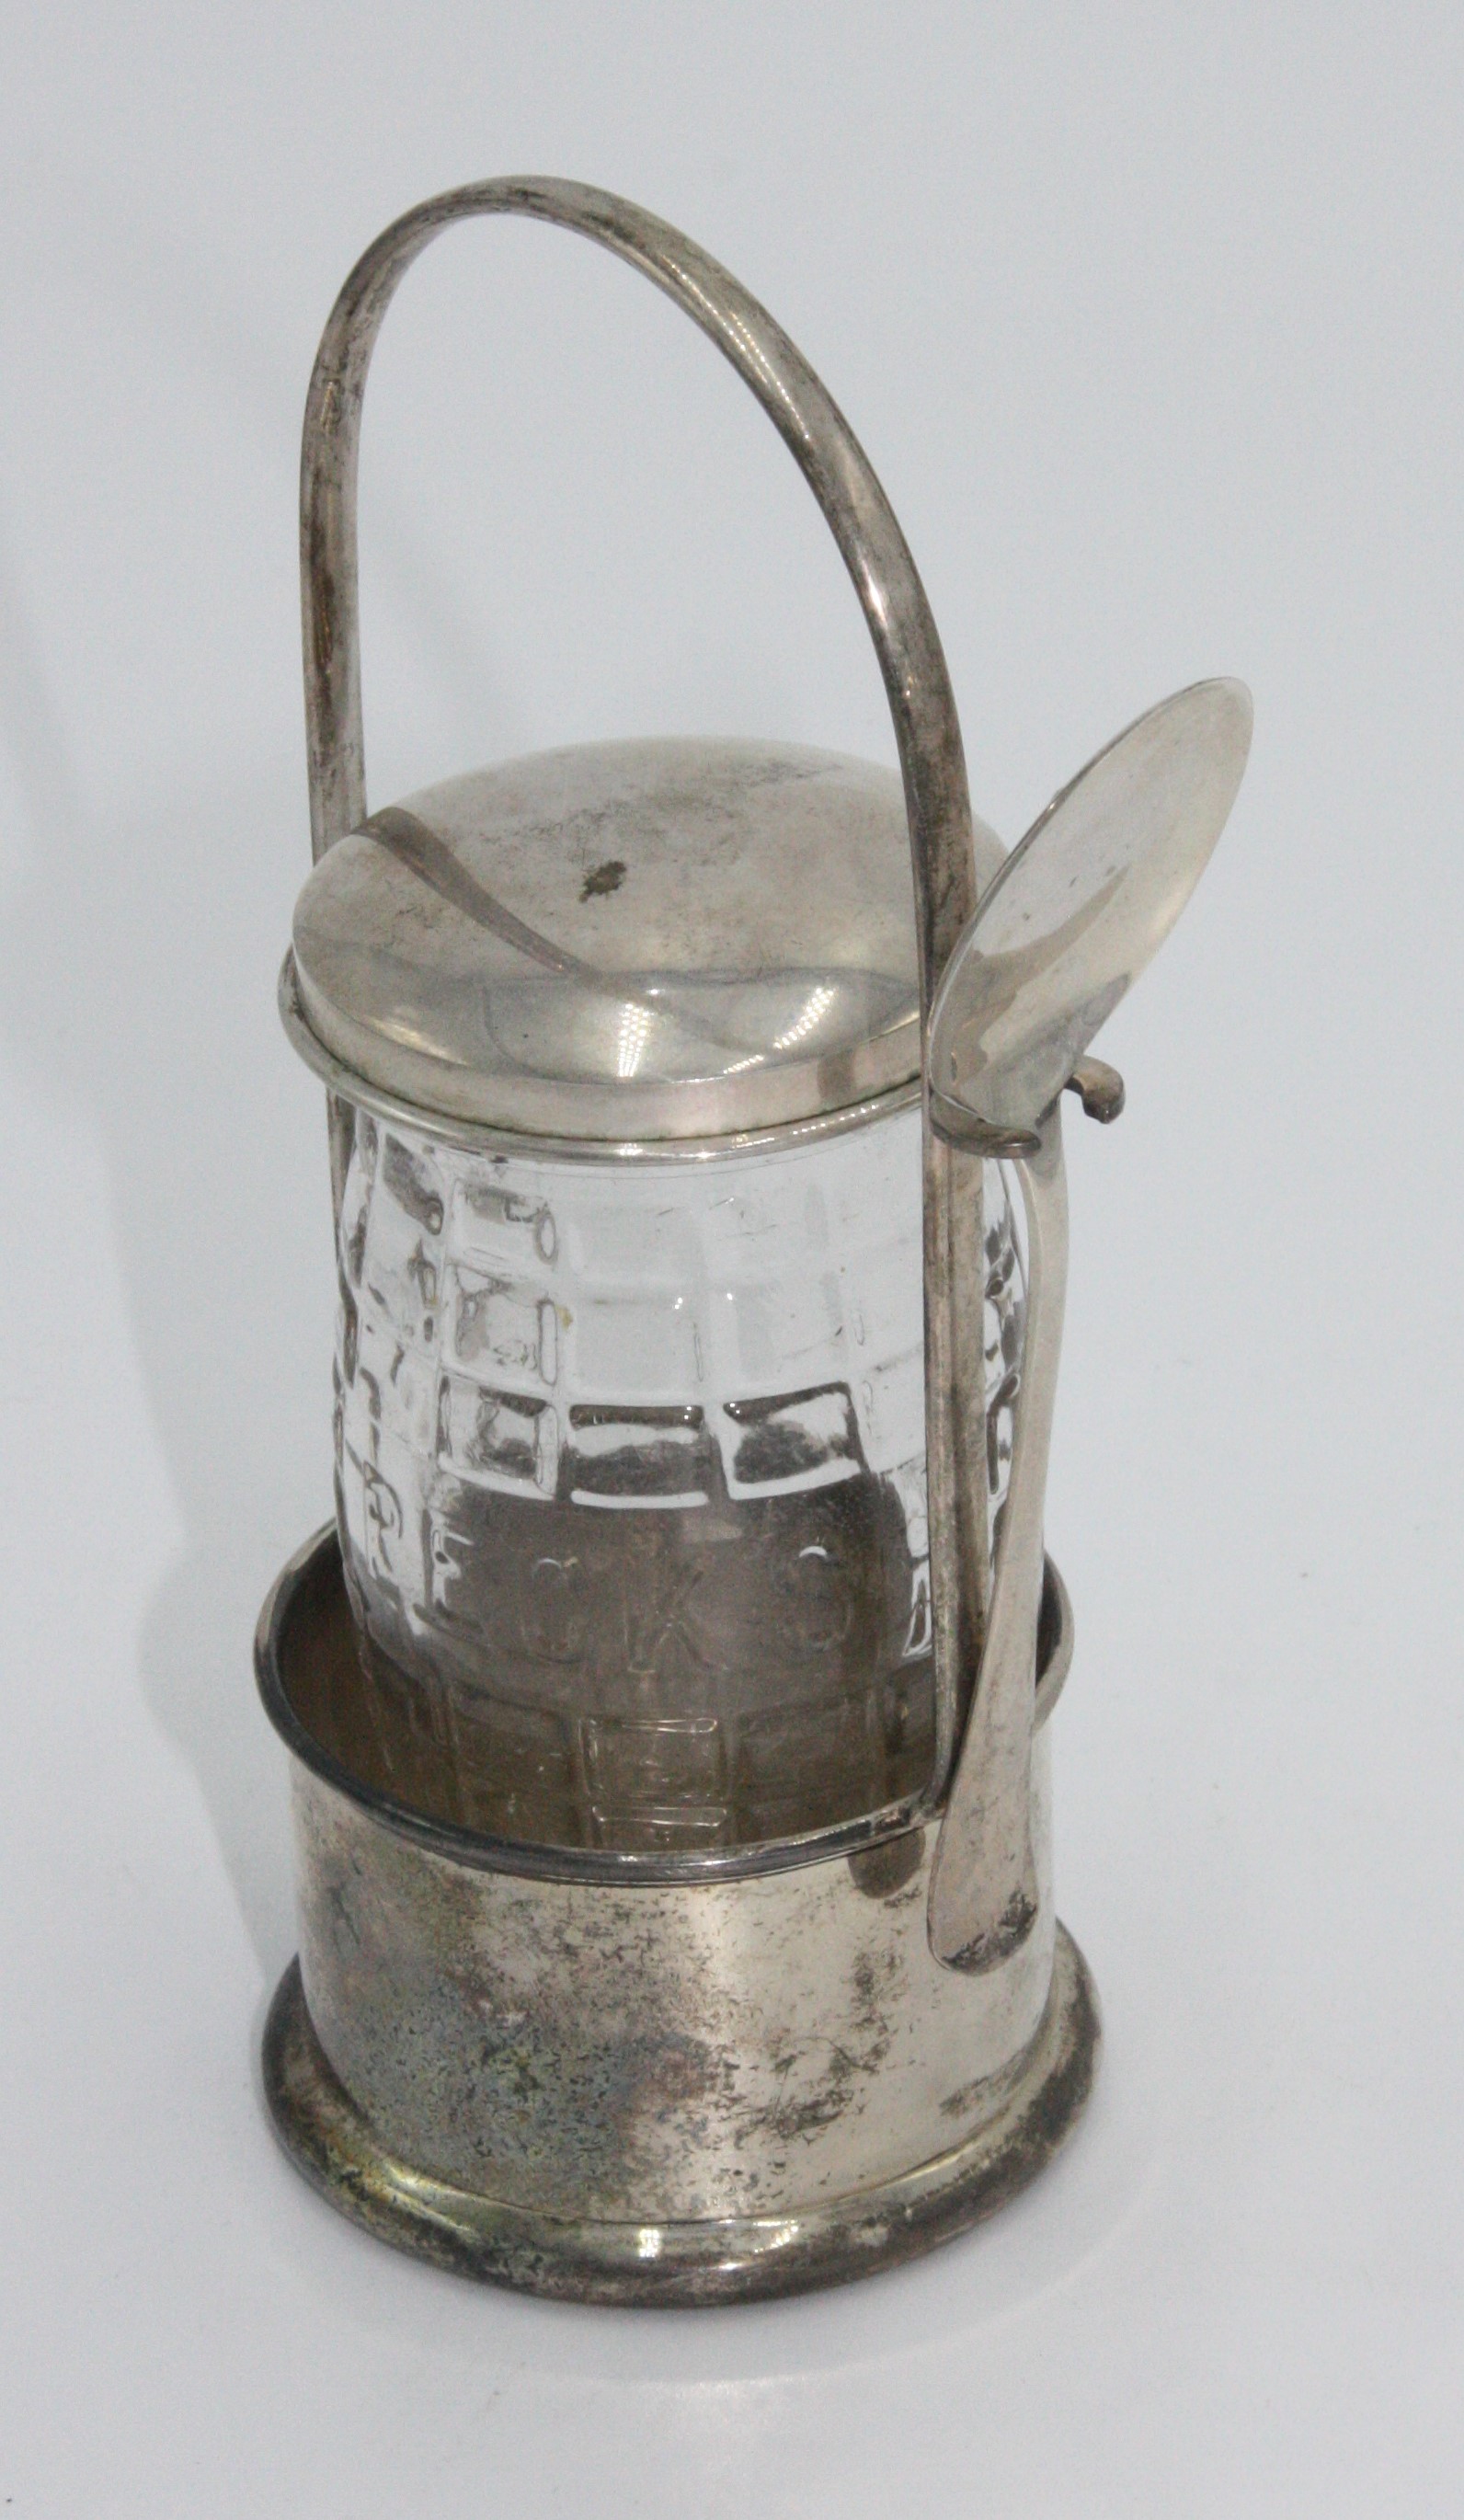 A silver bottle stand, spoon and lid (lacks bottle).